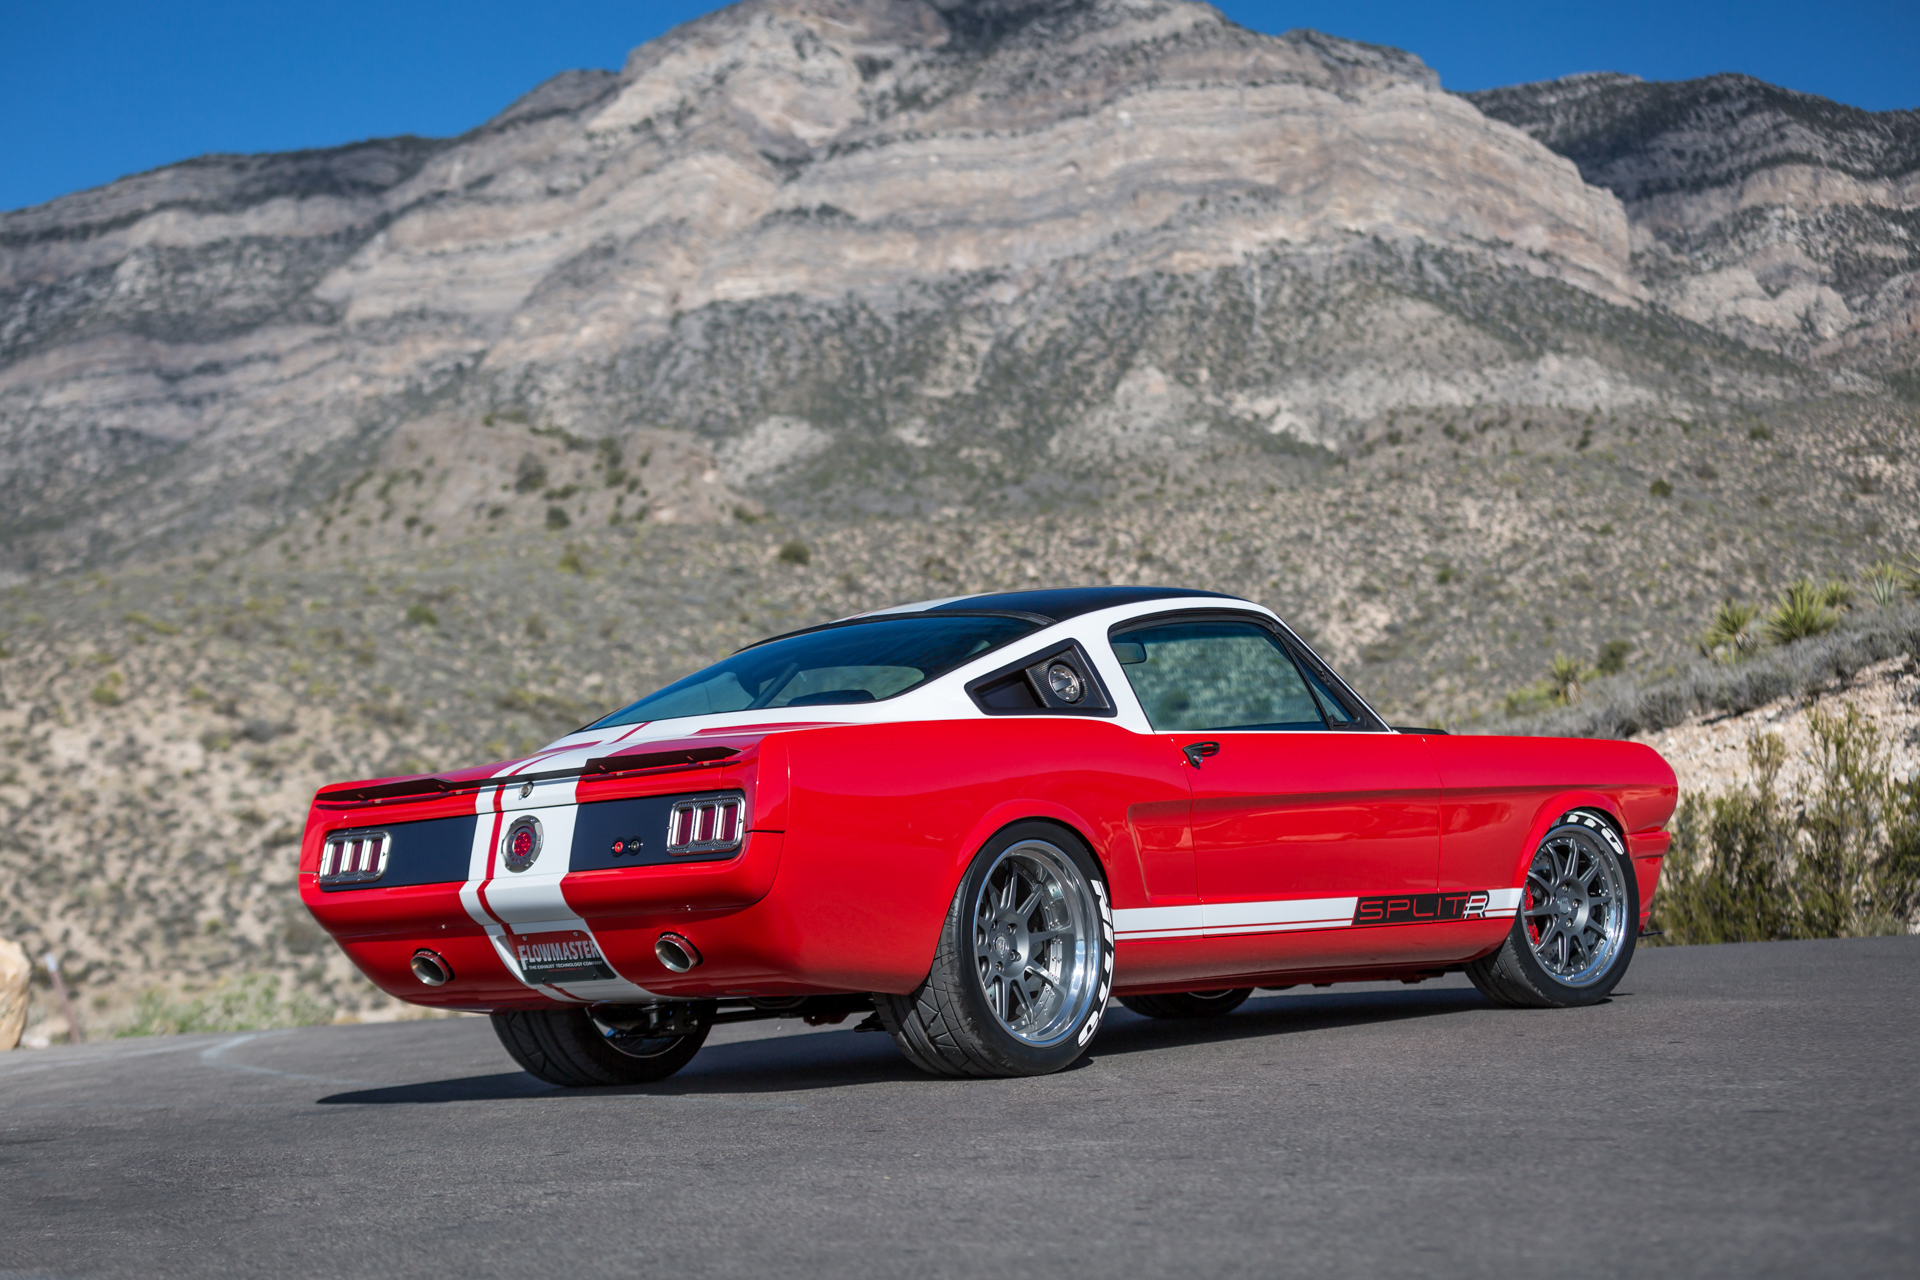 Car Fastback Ford Mustang Splitr Muscle Car Red Car Ringbrothers Tuning 1920x1280